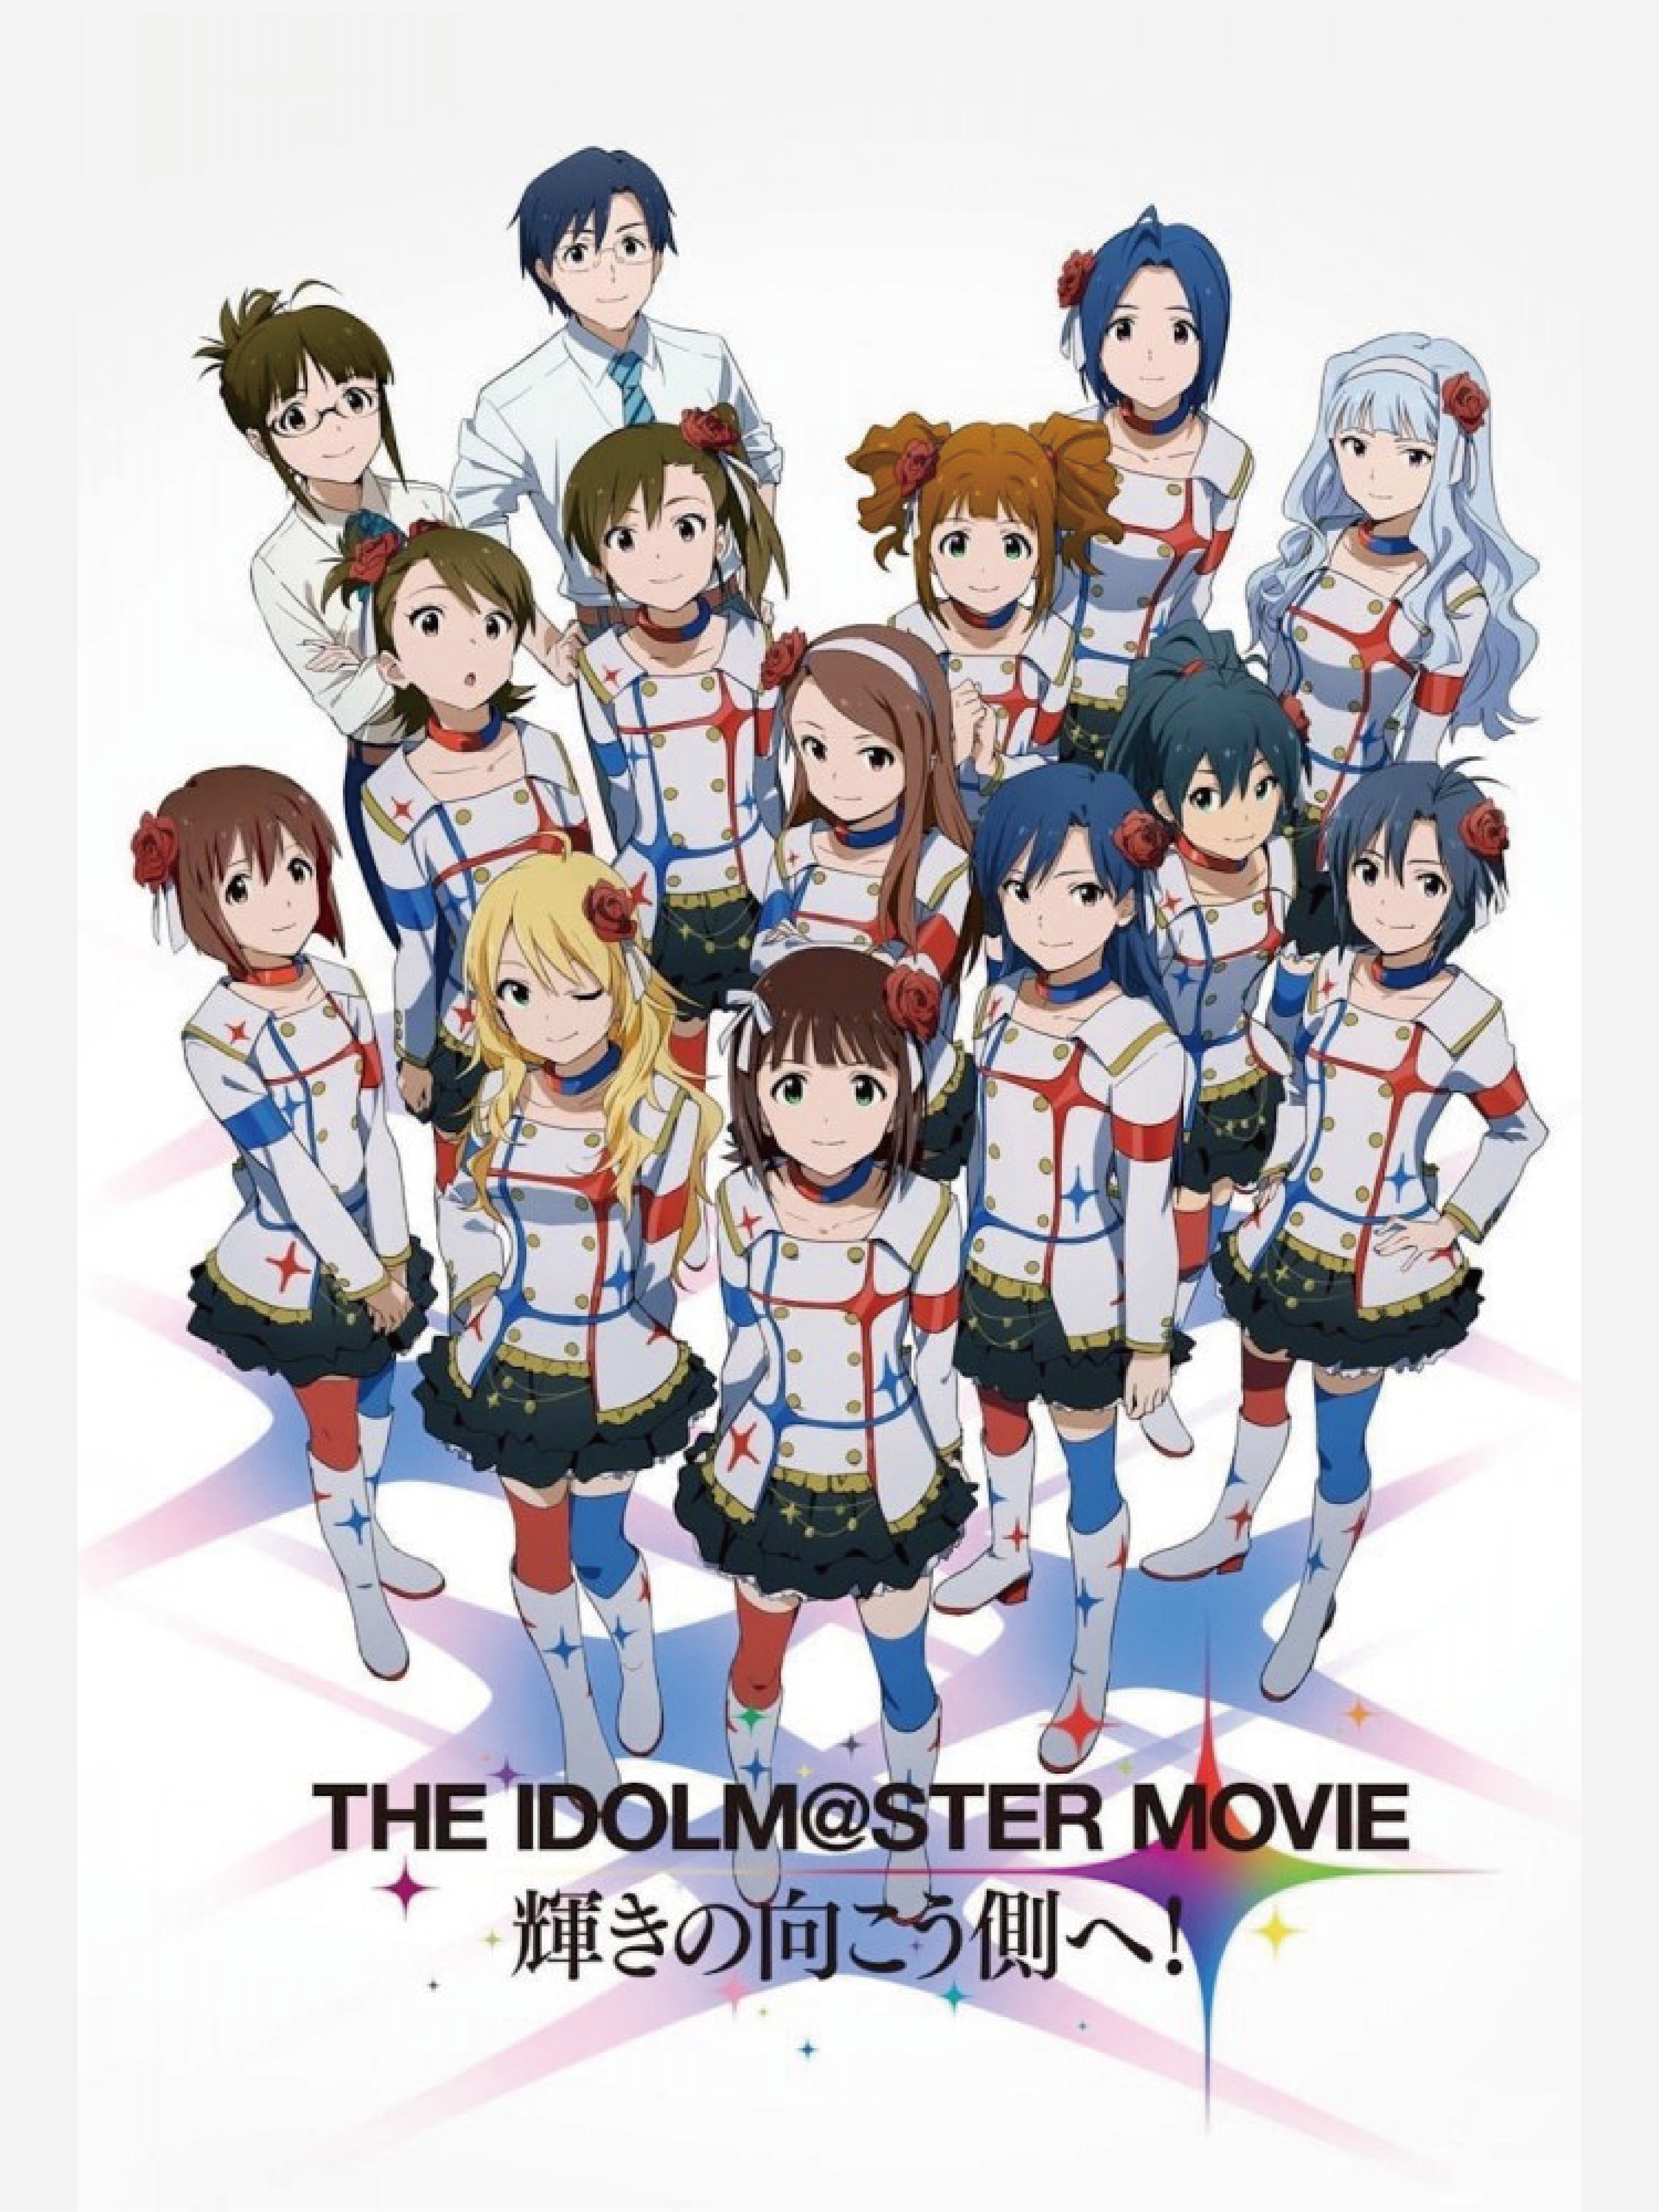 The iDOLM@STER Movie: Kagayaki no Mukougawa e! - The idol master theater version is facing the glorious shore!